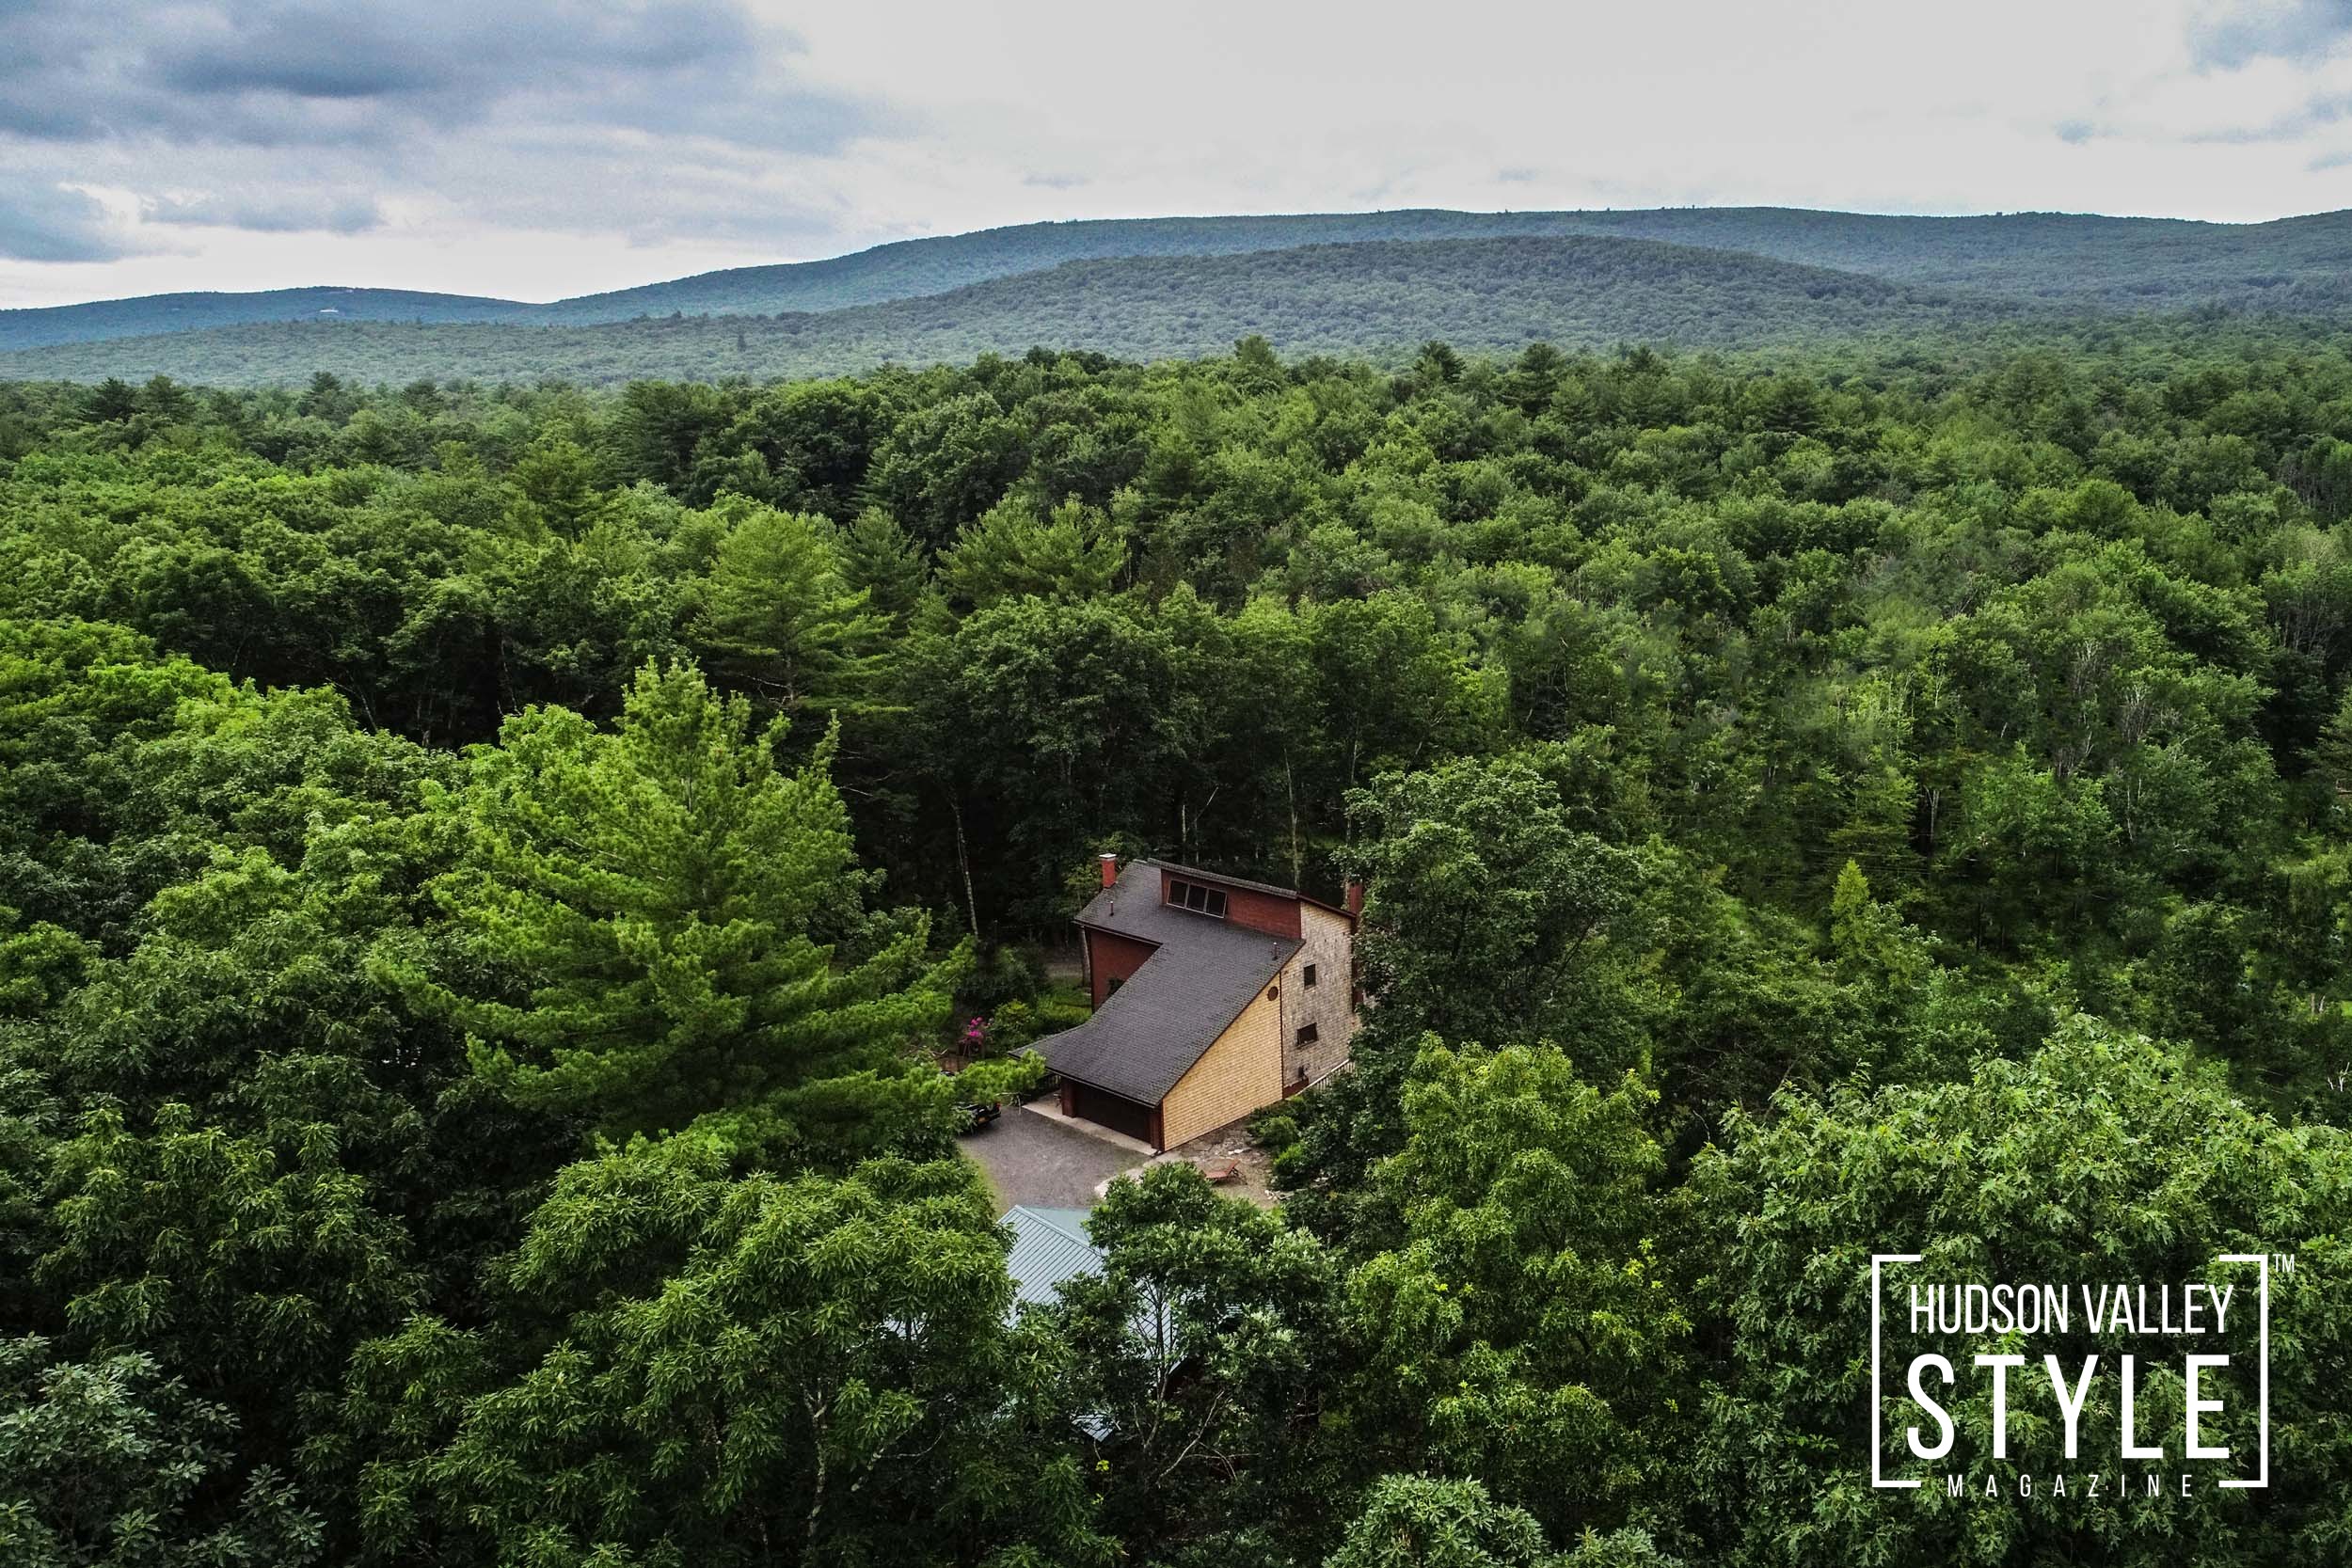 Villa Ashokan - Catskills - Take Me There! Story and Photography by Maxwell Alexander, Editor-in-Chief, Hudson Valley Style Magazine